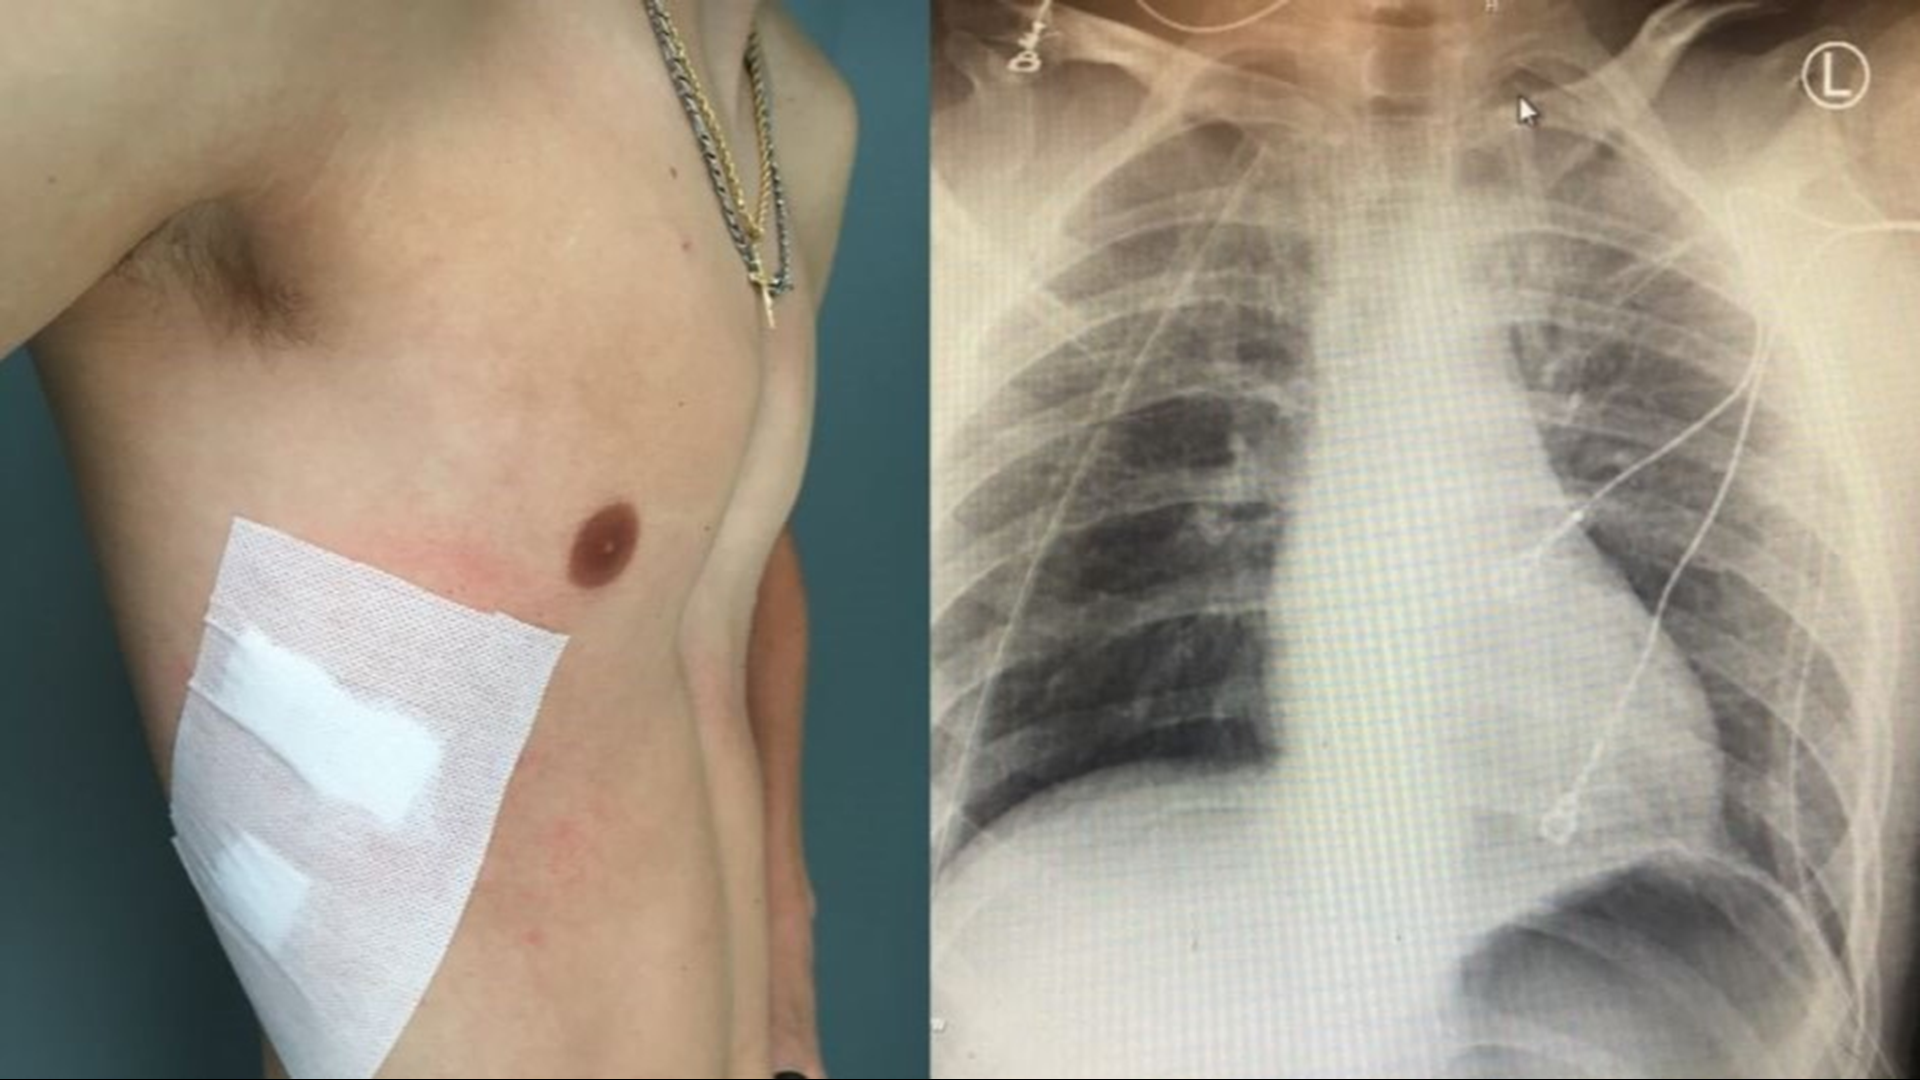 The 17-year-old hid his vaping for over a year, until he was rushed to the ER with a collapsed lung.